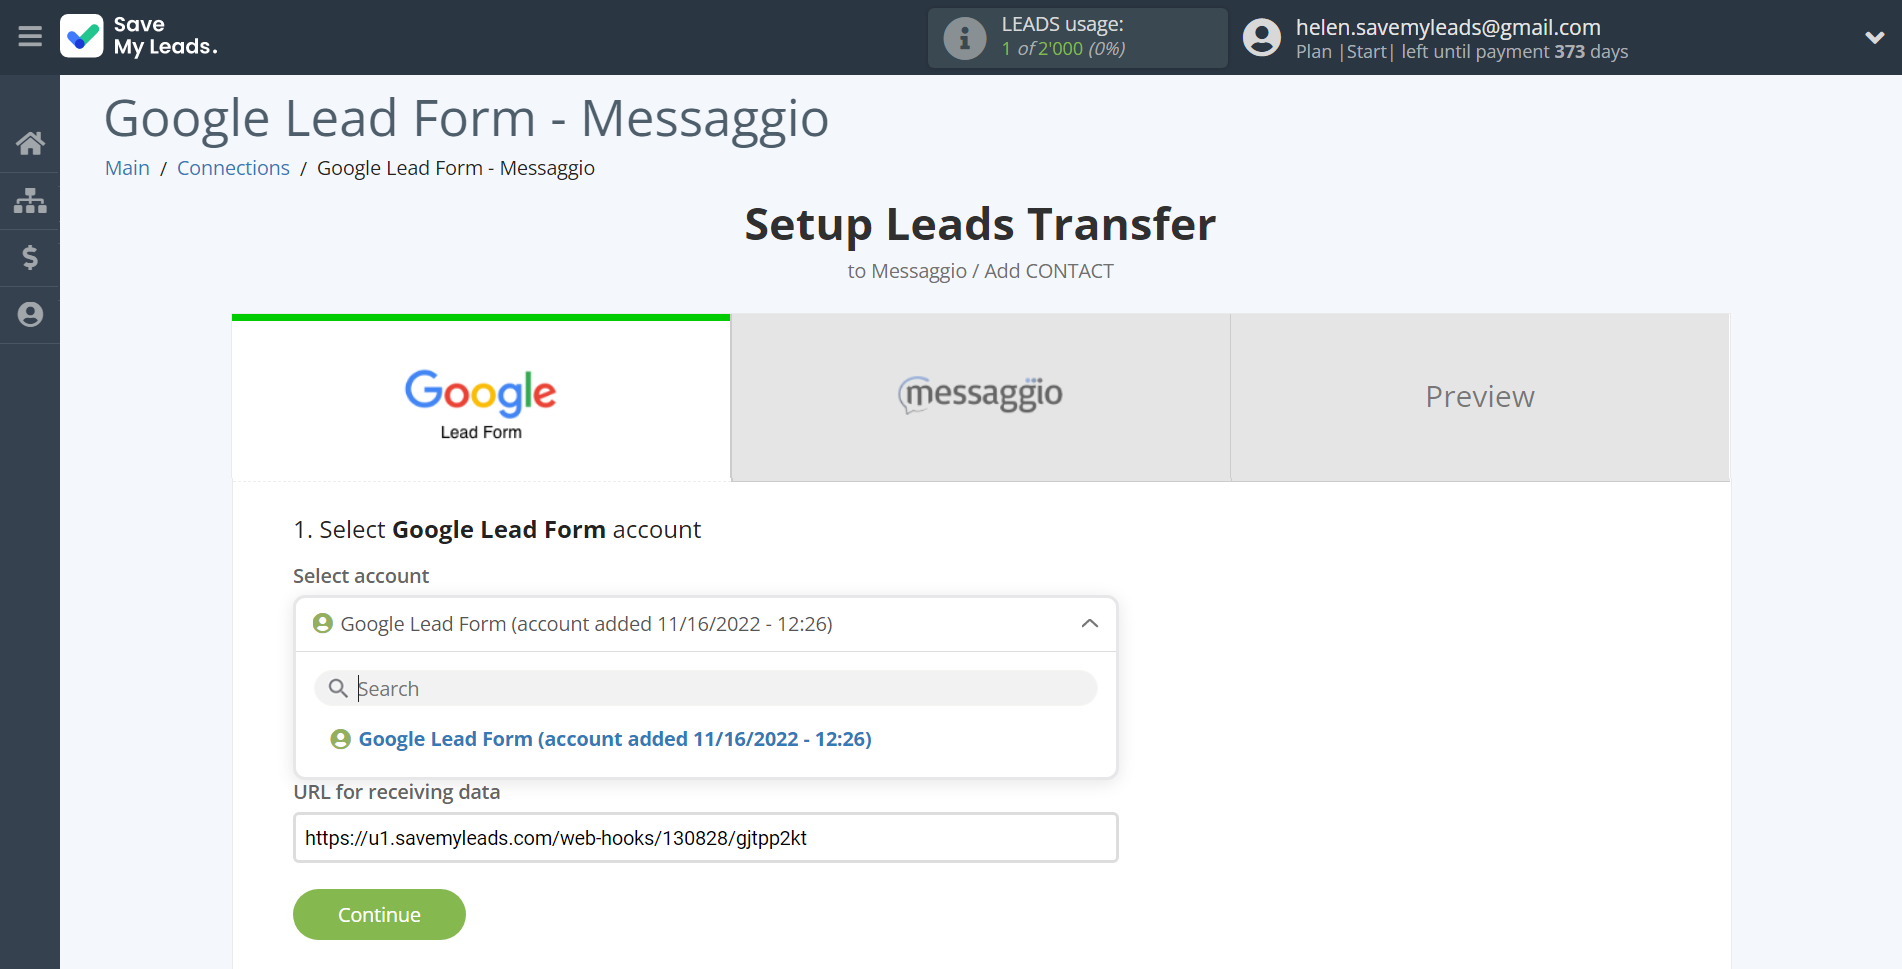 How to Connect Google Lead Form with Messaggio | Data Source account selection